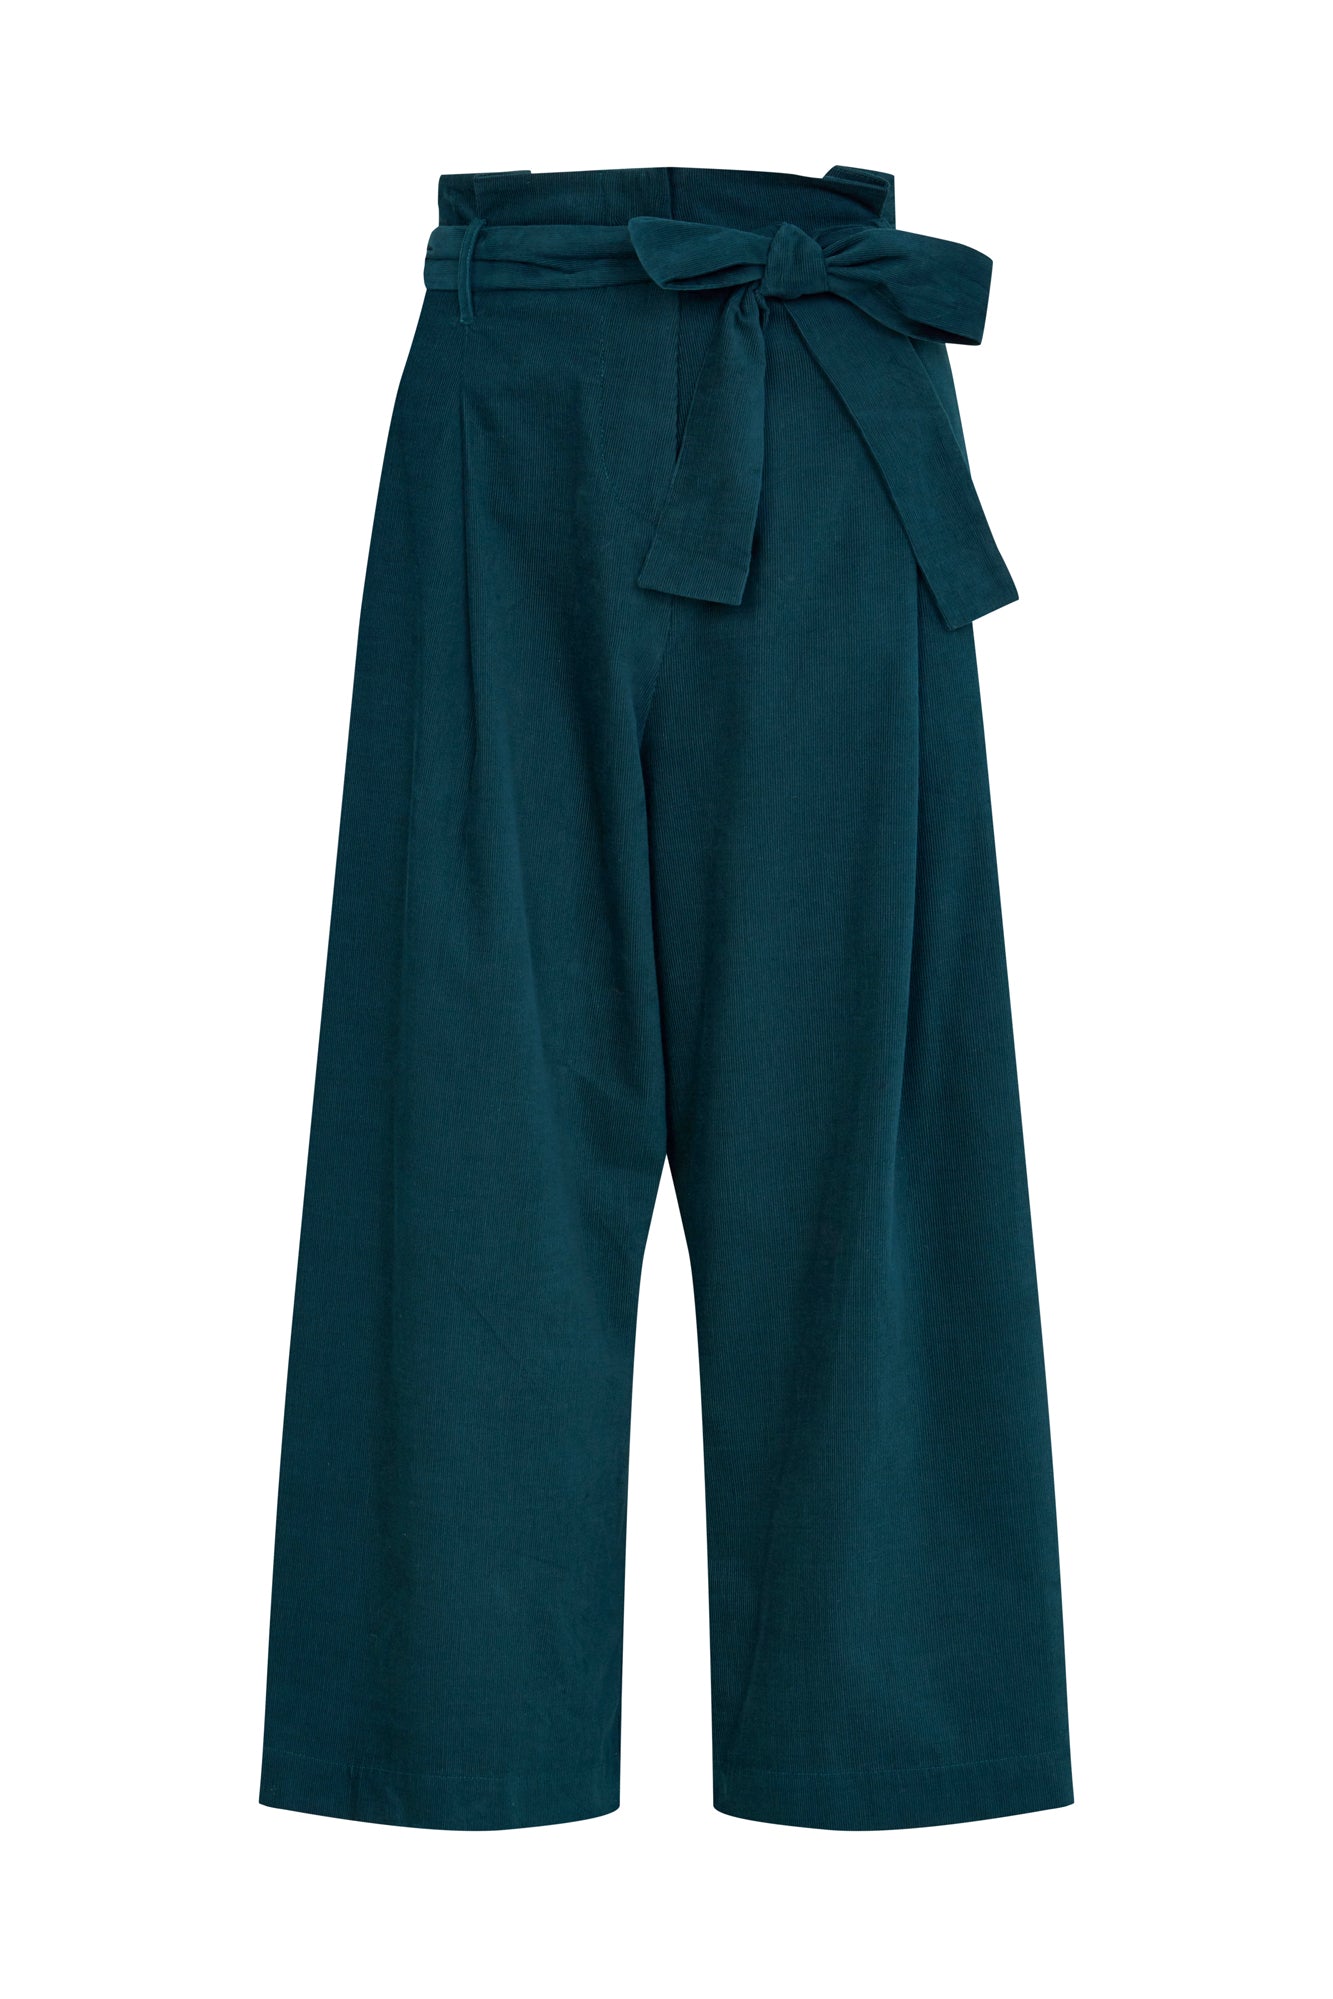 Image of Gilda Needlecord Deep Teal Trouser Carryover - Trouser